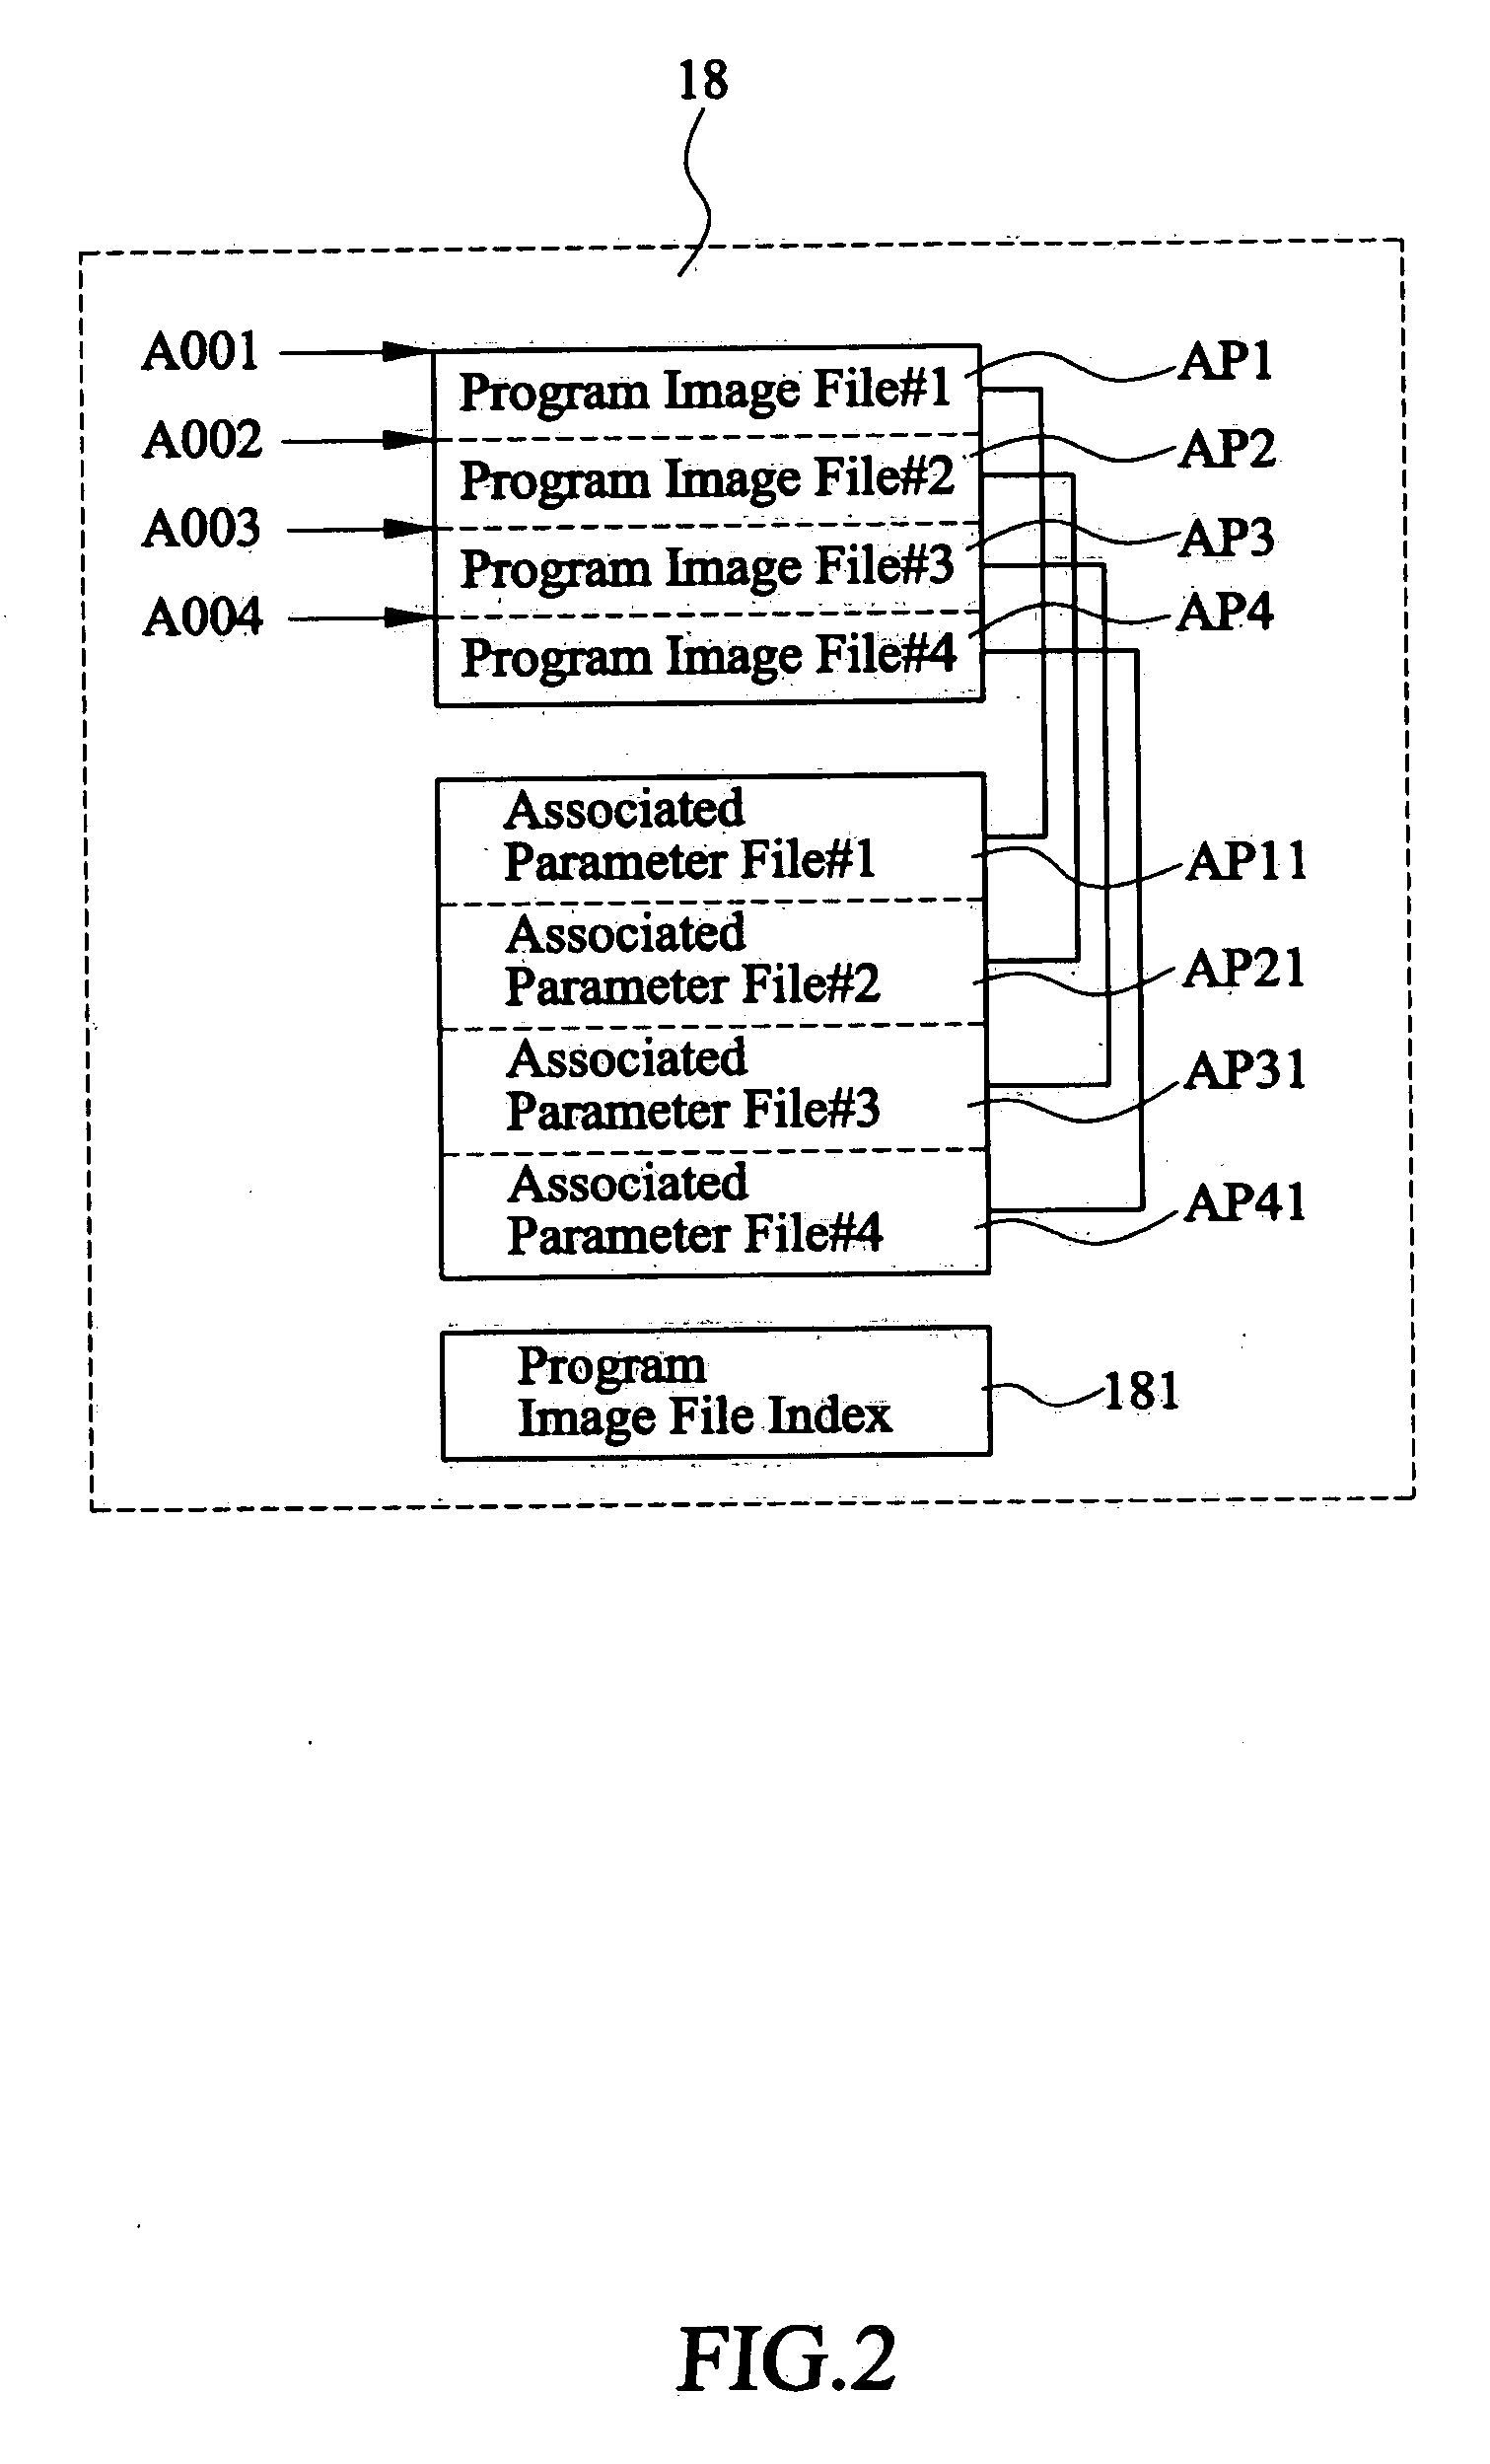 Method for express execution of computer function options by loading program image file